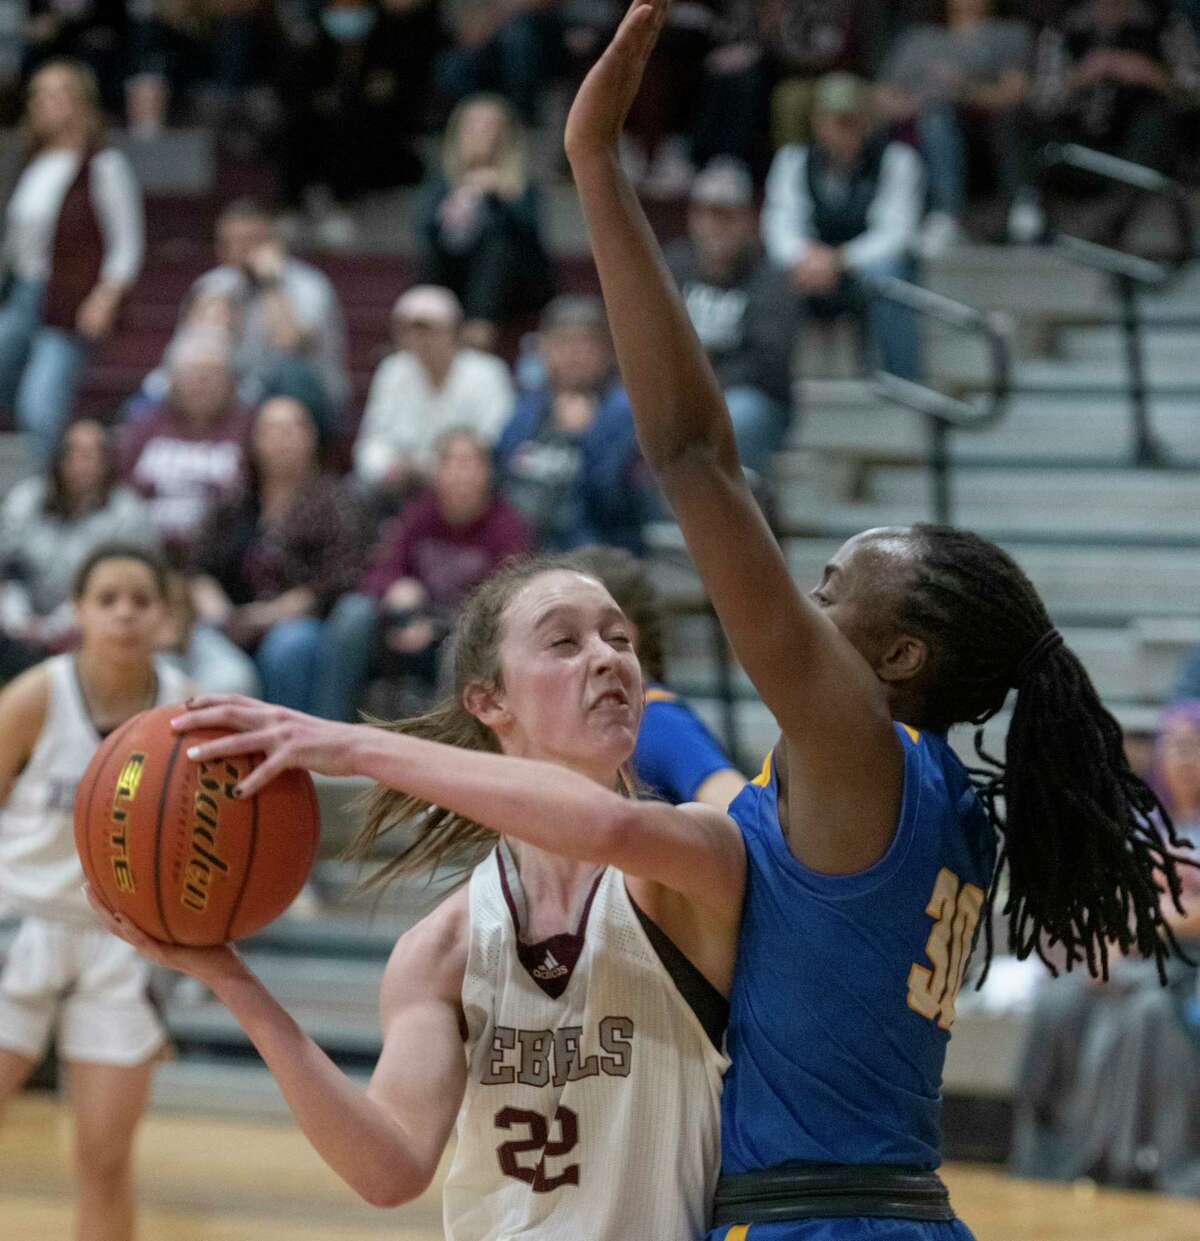 Legacy High's Maggie Erdwurm looks to make a shot as Frenship's Mikah Chapman defends 01/25/2022 the Legacy High gym. Tim Fischer/Reporter-Telegram